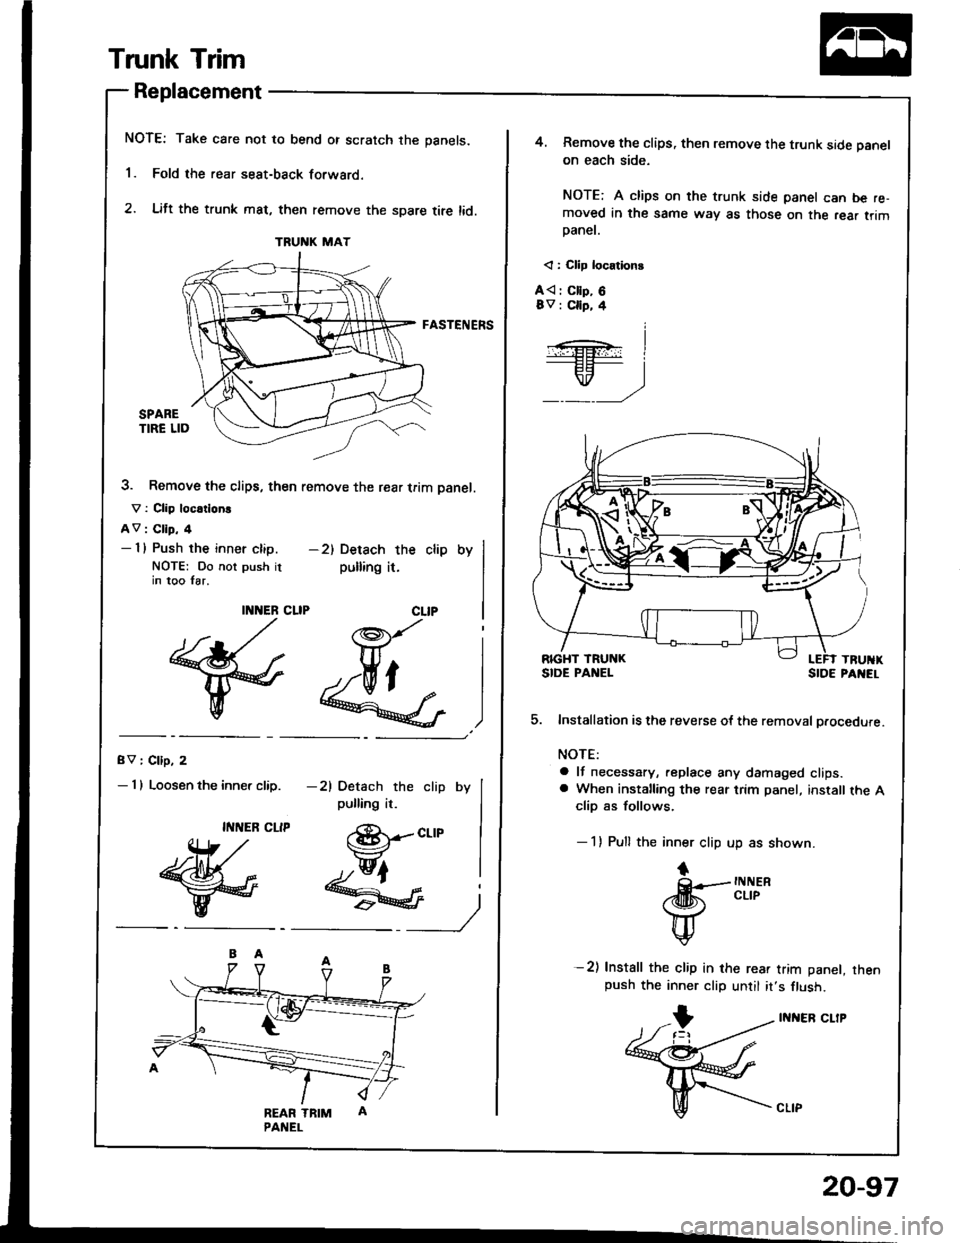 HONDA INTEGRA 1994 4.G Workshop Manual Trunk Trim
Replacement
NOTE: Take care not to bend or scratch the panels.
1. Fold the rear seat-back forwaro.
2. Lift the trunk mat, then remove the spare tire lid.
FASTENERS
3. Remove the clips, the